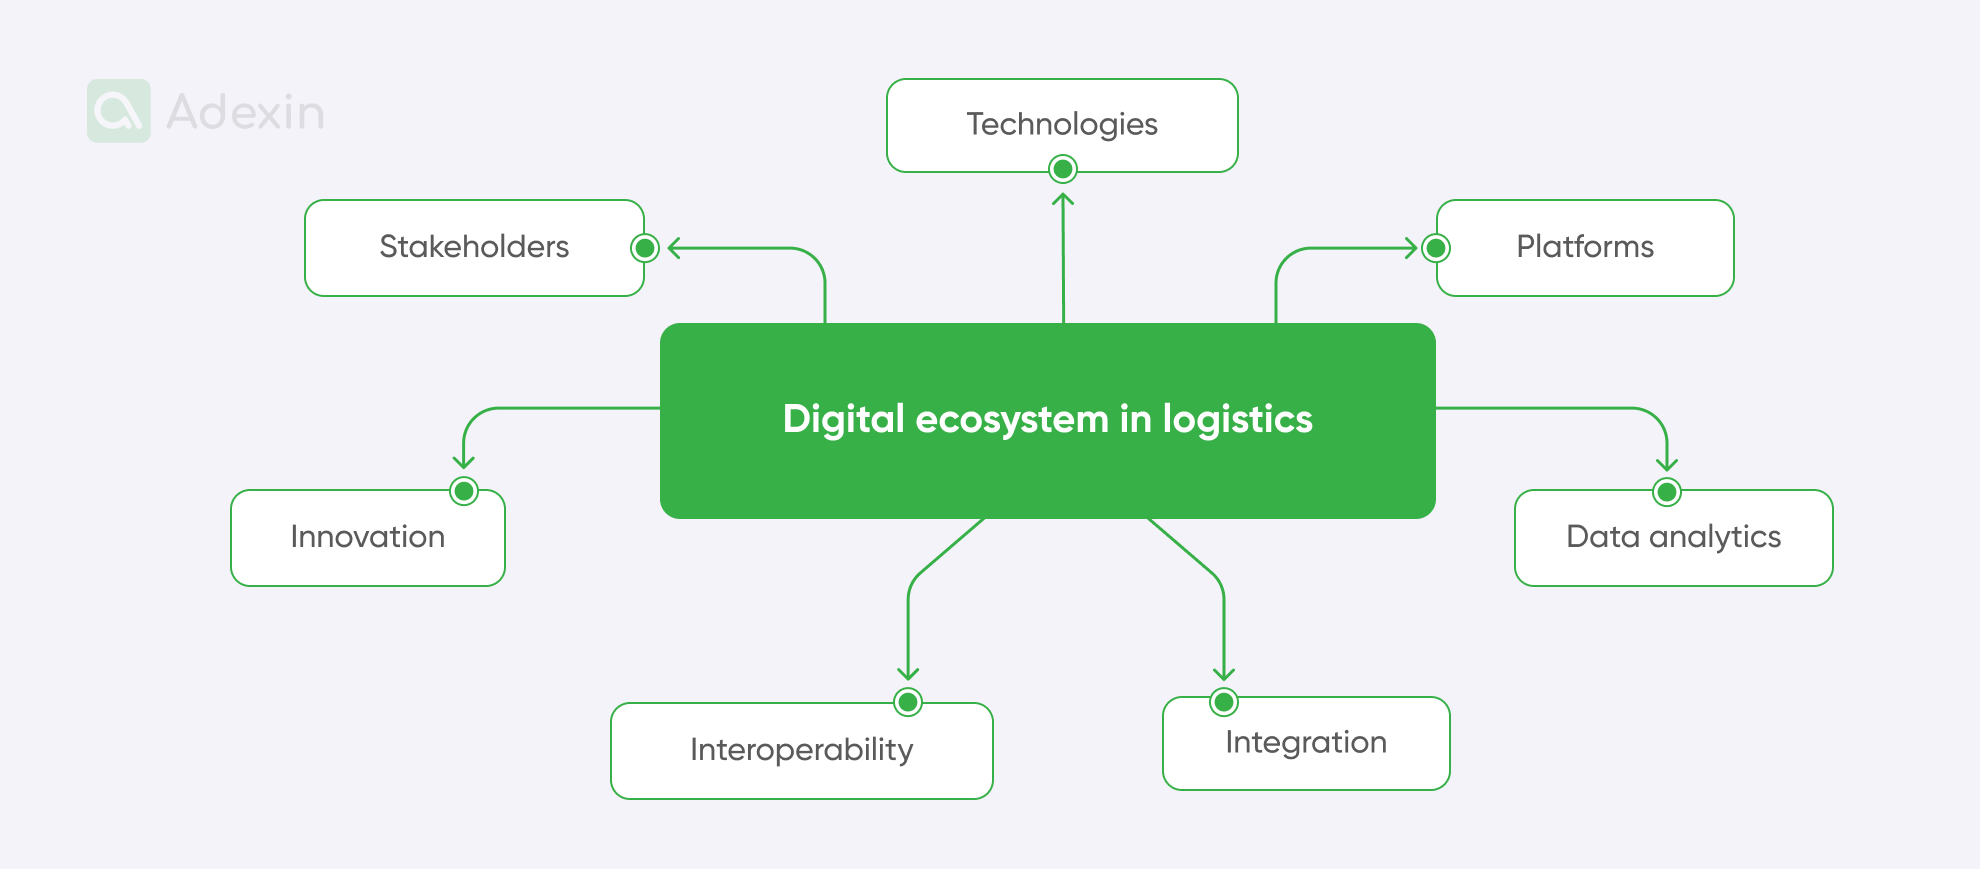 Technologies that are used for digital transformation in logistics